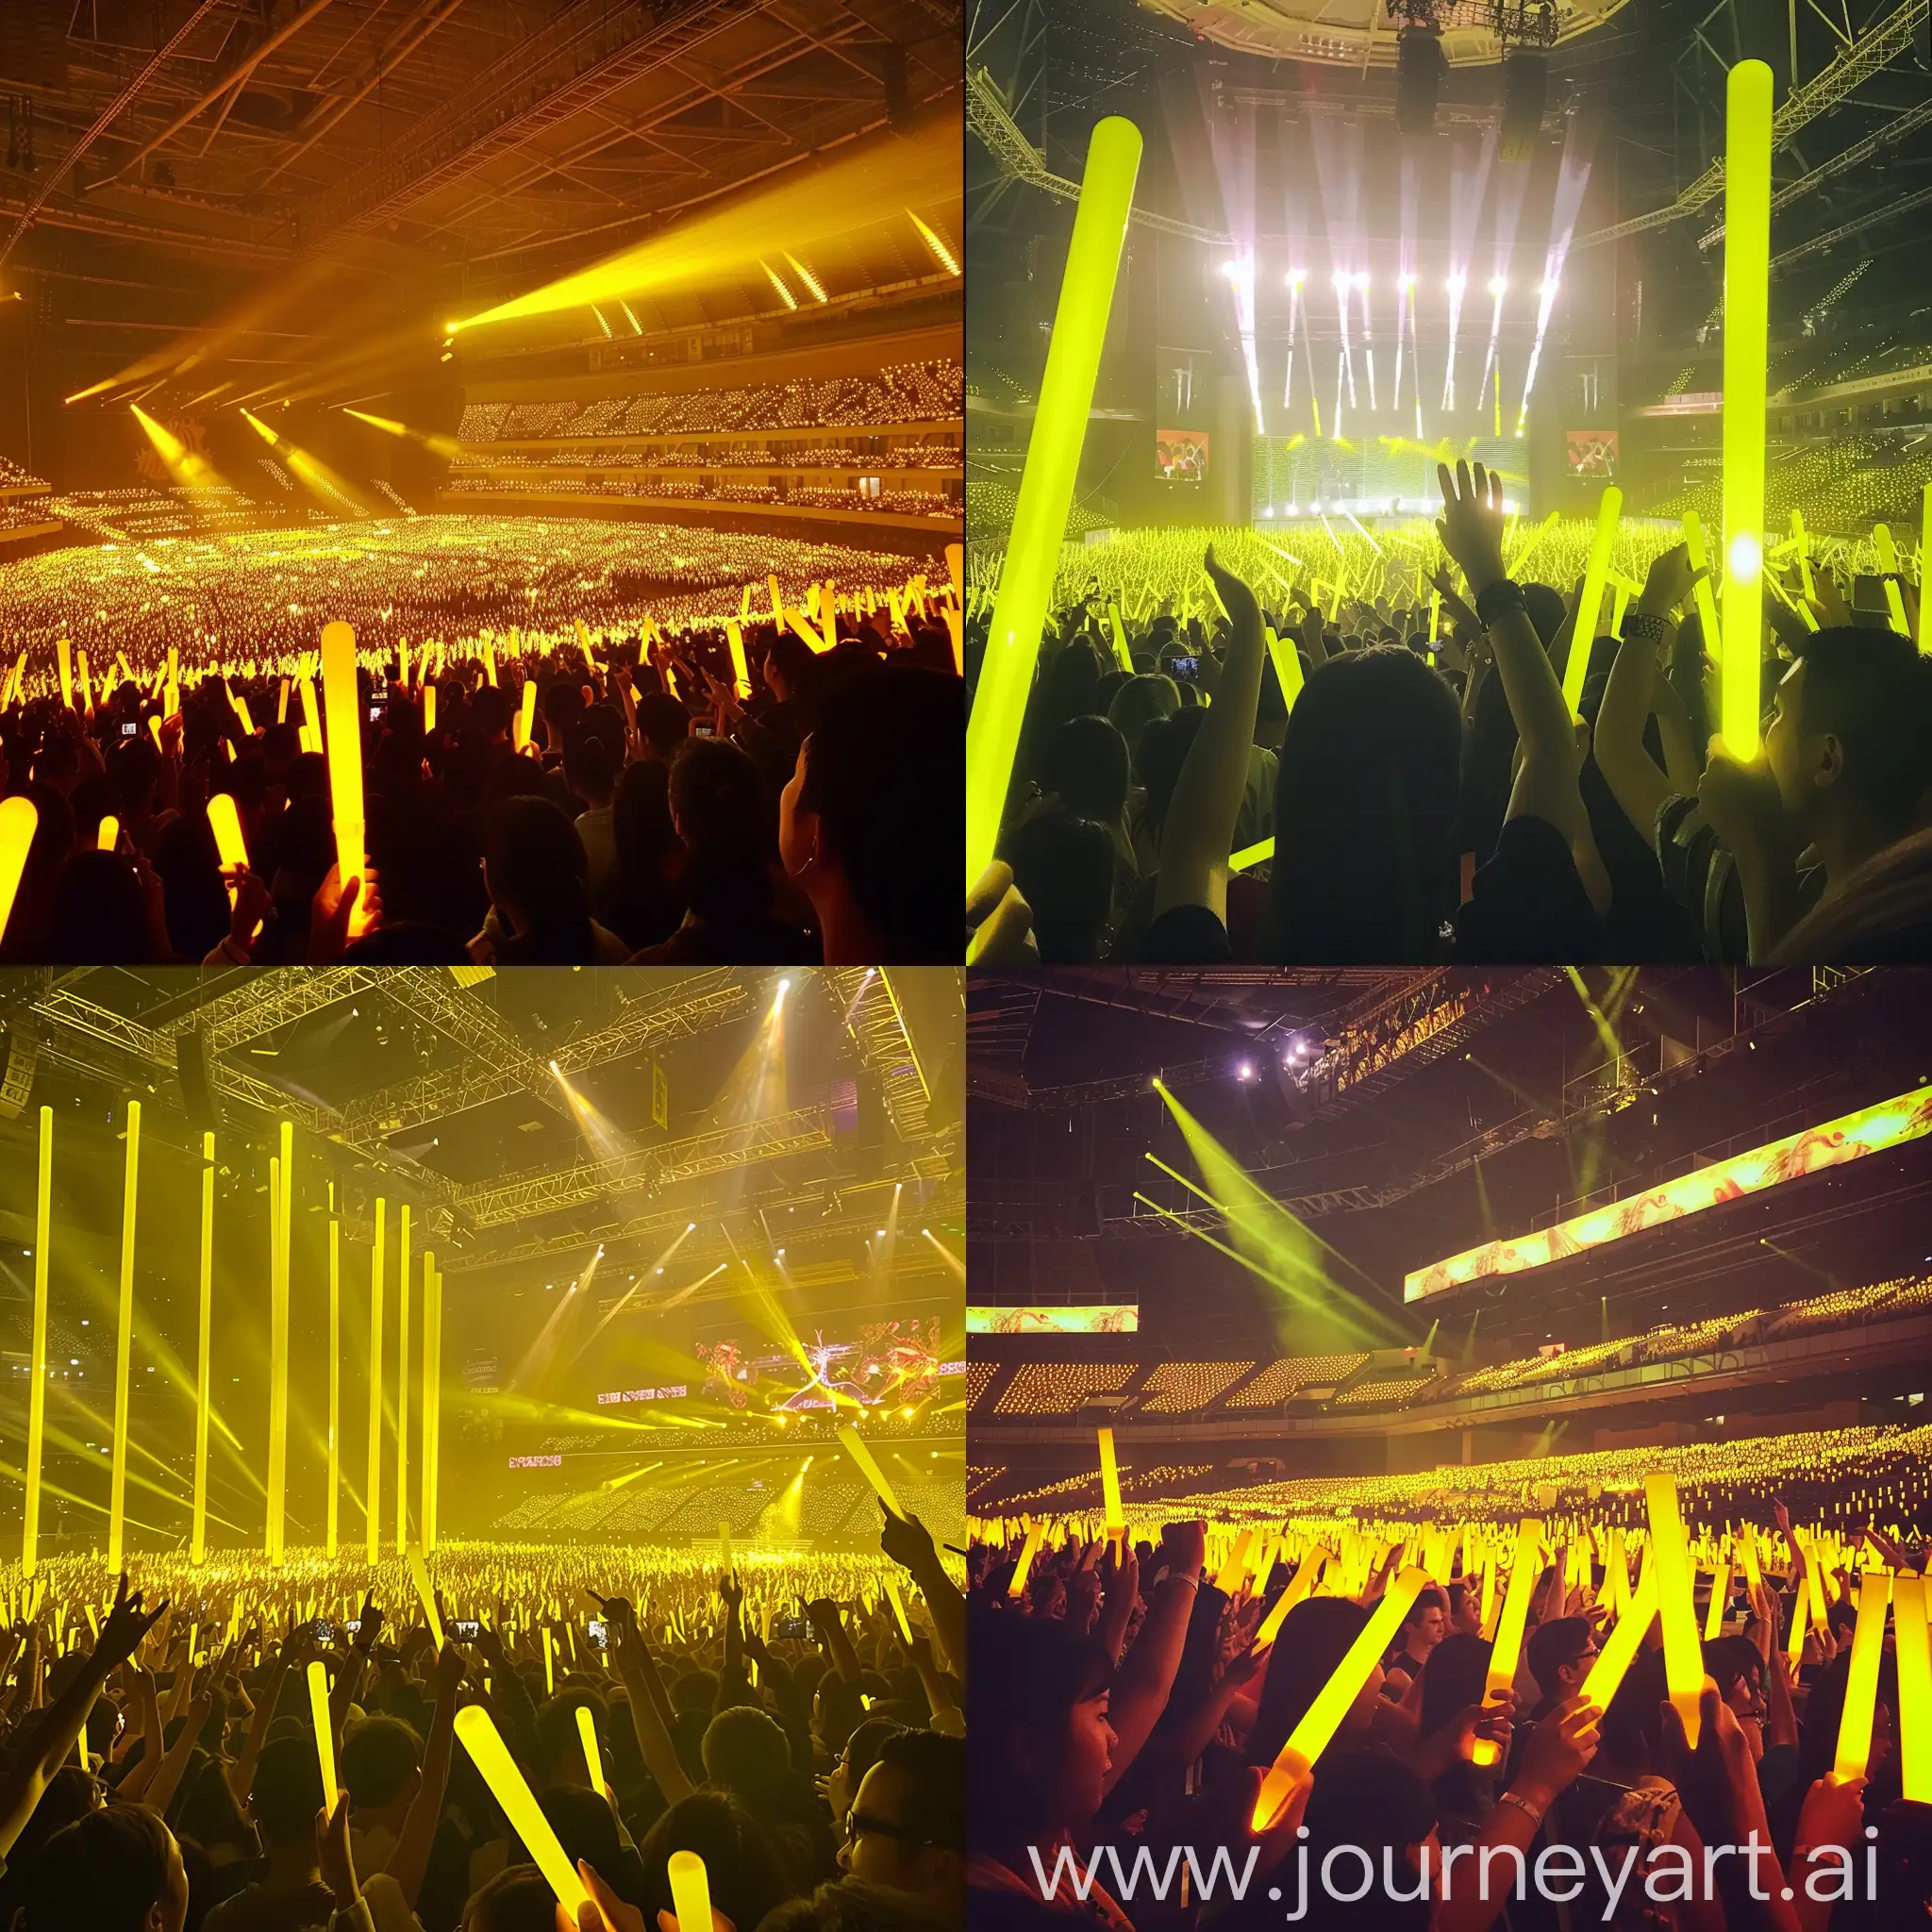 Vibrant-Concert-Scene-with-Glowing-Yellow-Lights